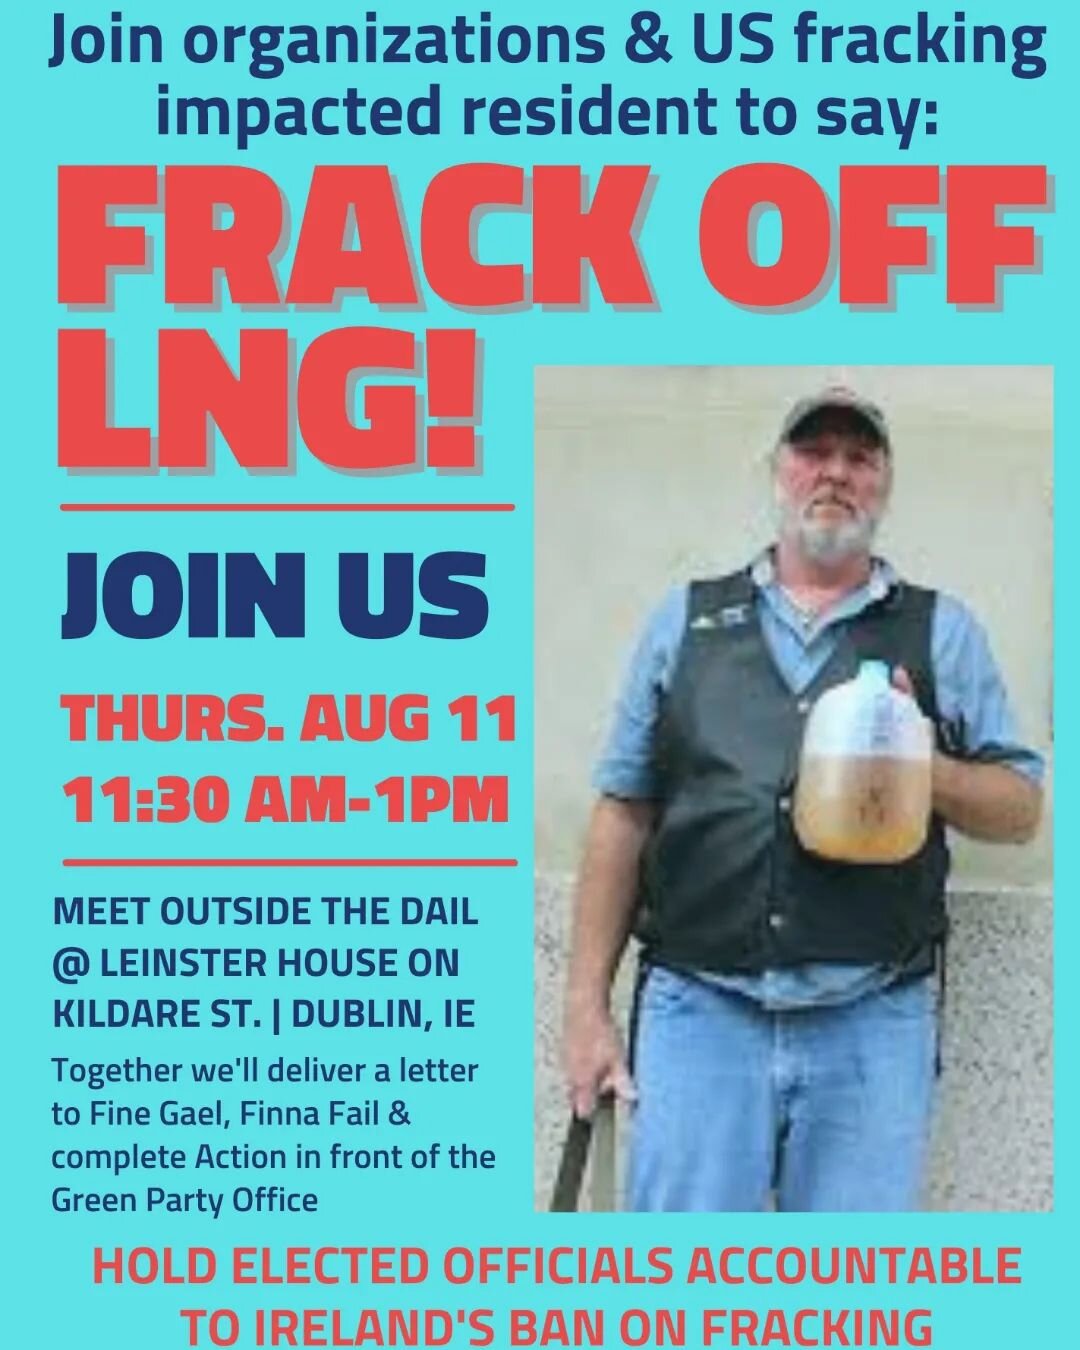 Be there tomorrow if you can! We must #KeepIrelandLNGFree starting with preventing #ShannonLNG